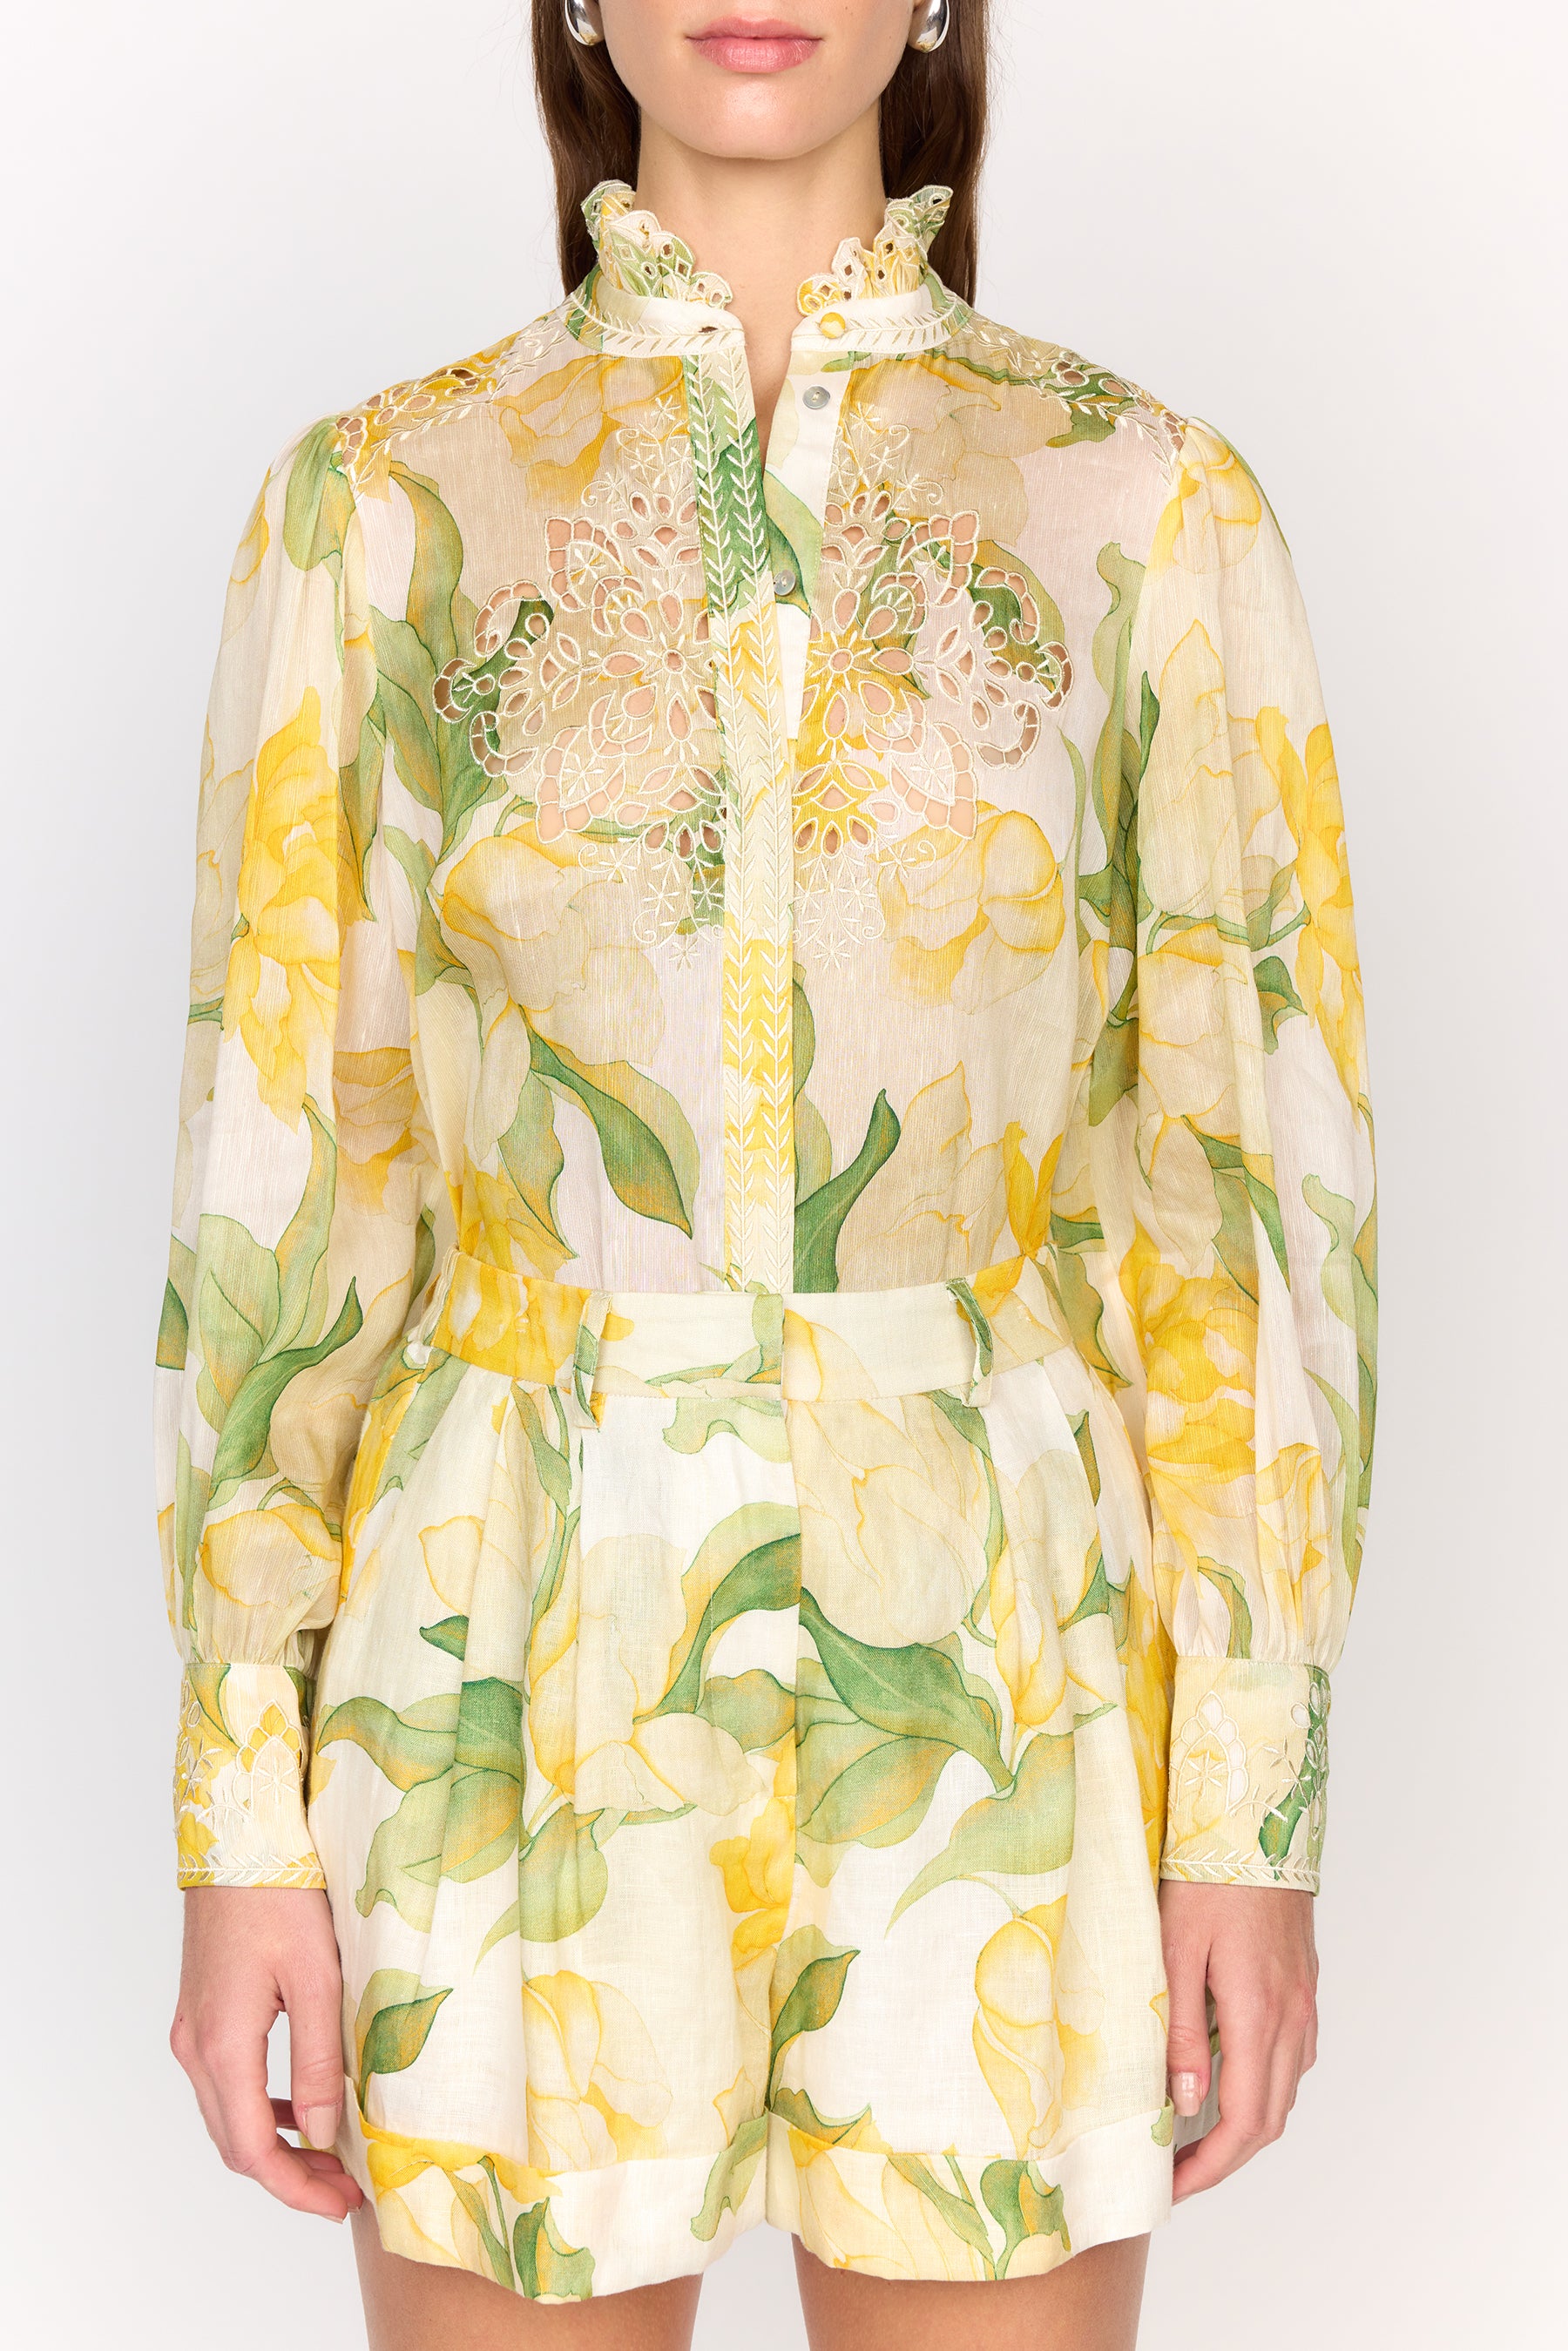 Marley Top - Waterlily Yellow